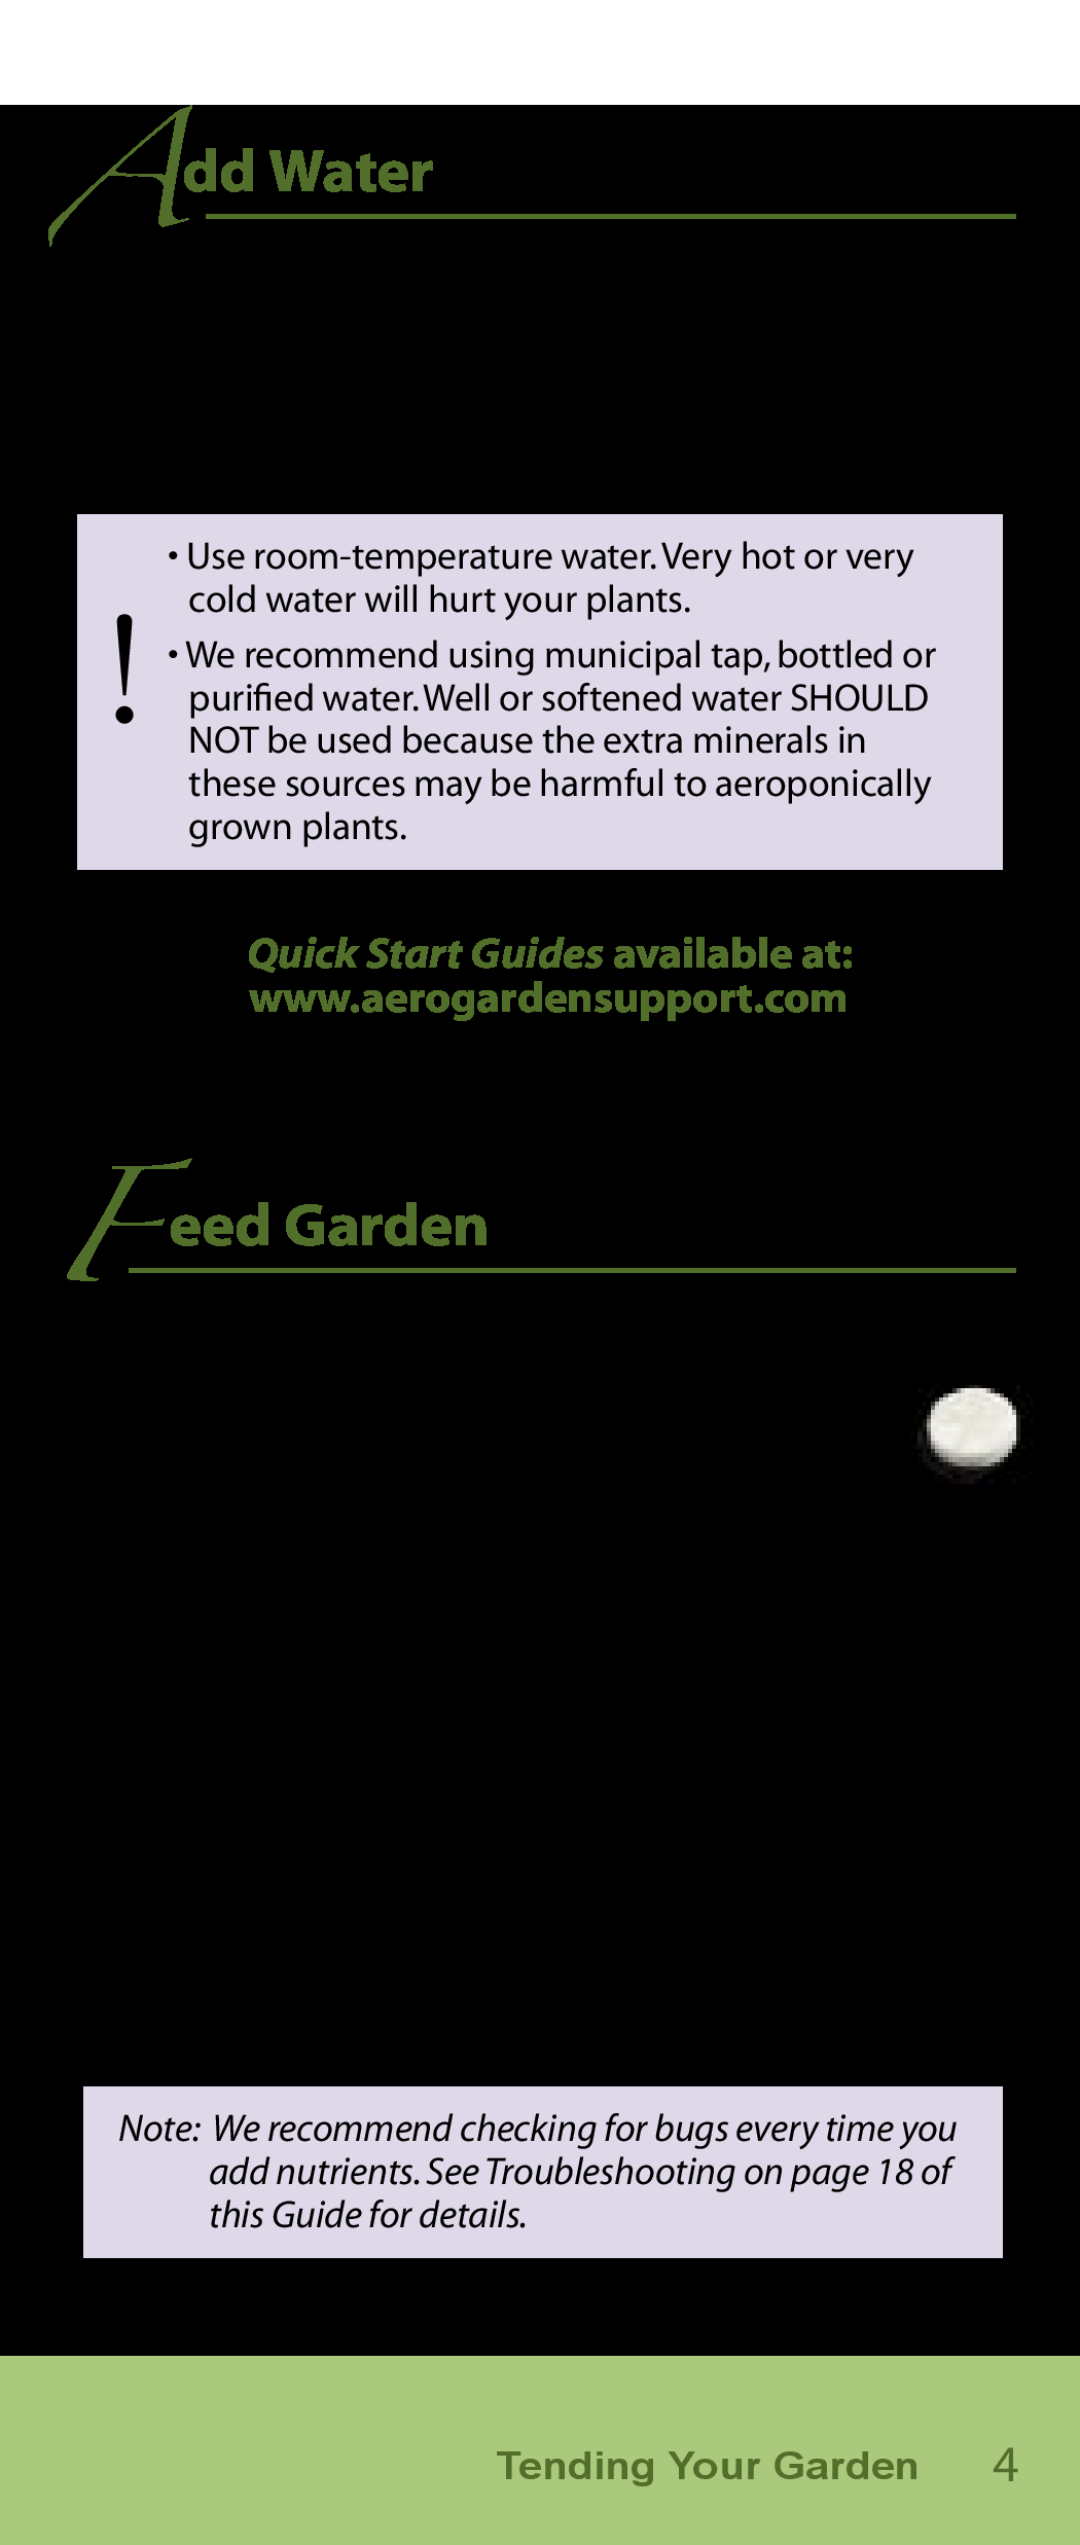 AeroGarden Flower Series manual Add Water, F eed Garden, Quick Start Guides available at 